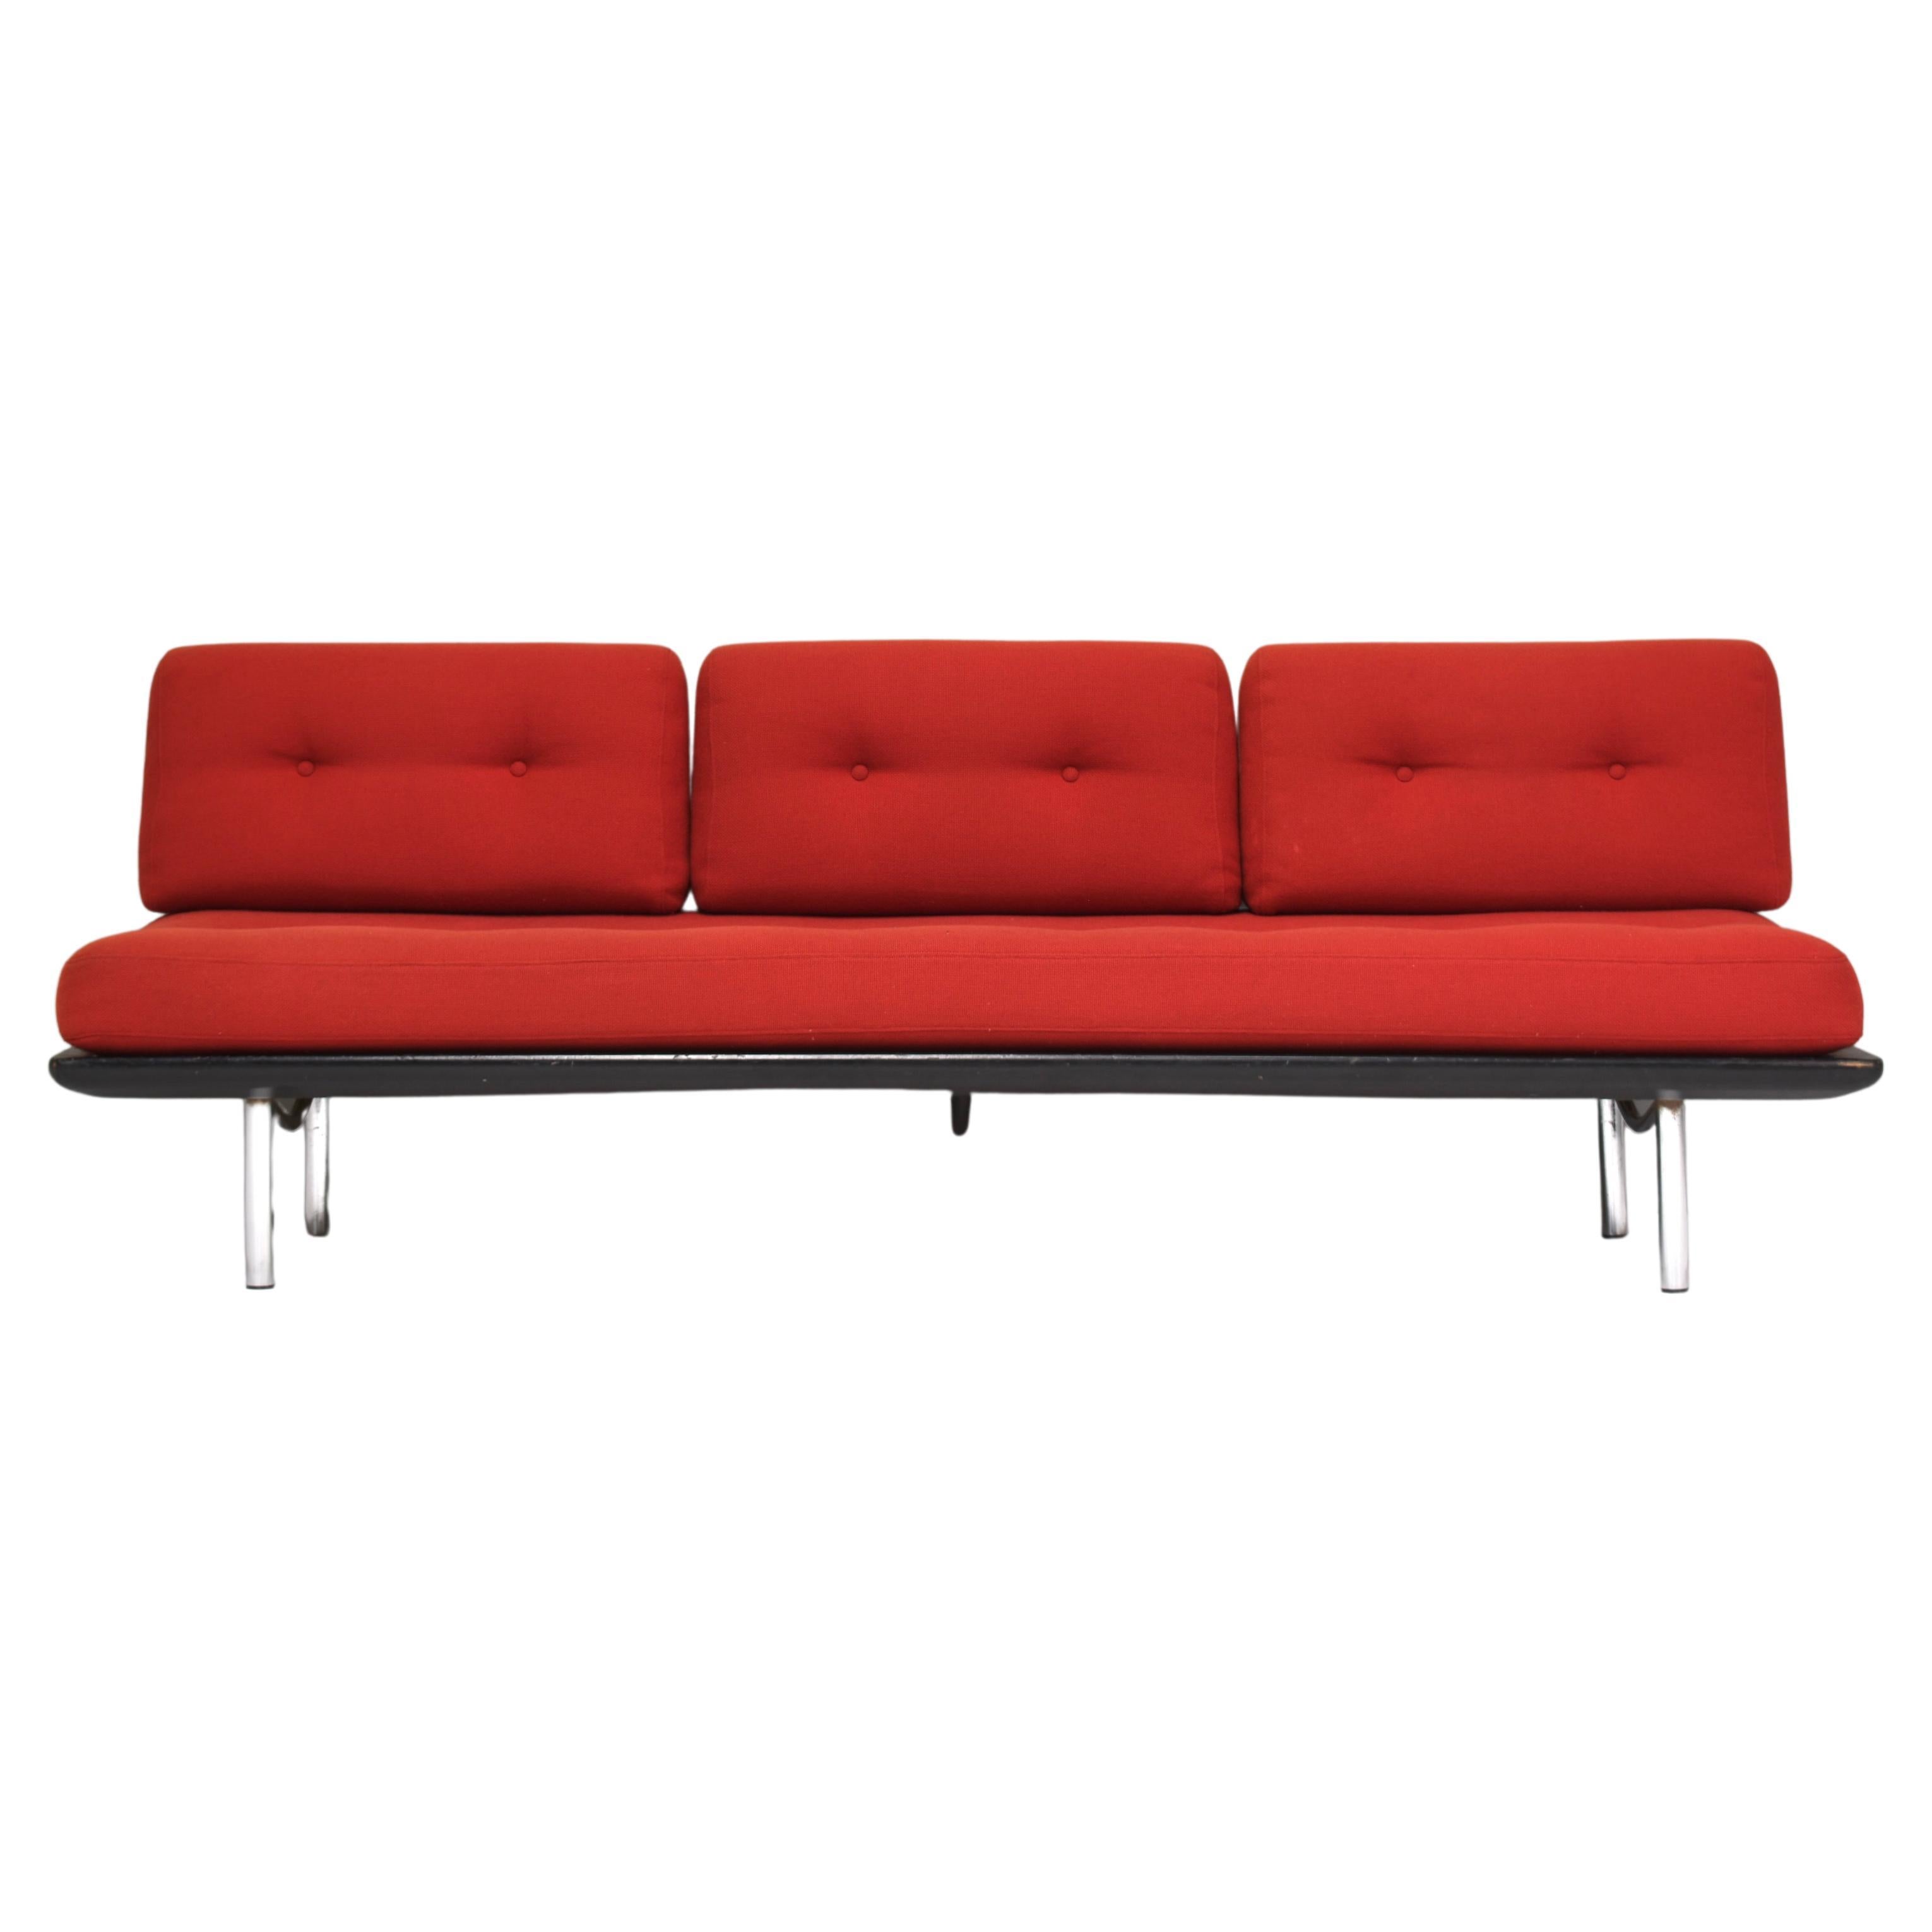 Sofa by or in the Style of Martin Visser or Kho Liang Ie, Netherlands, 1960s